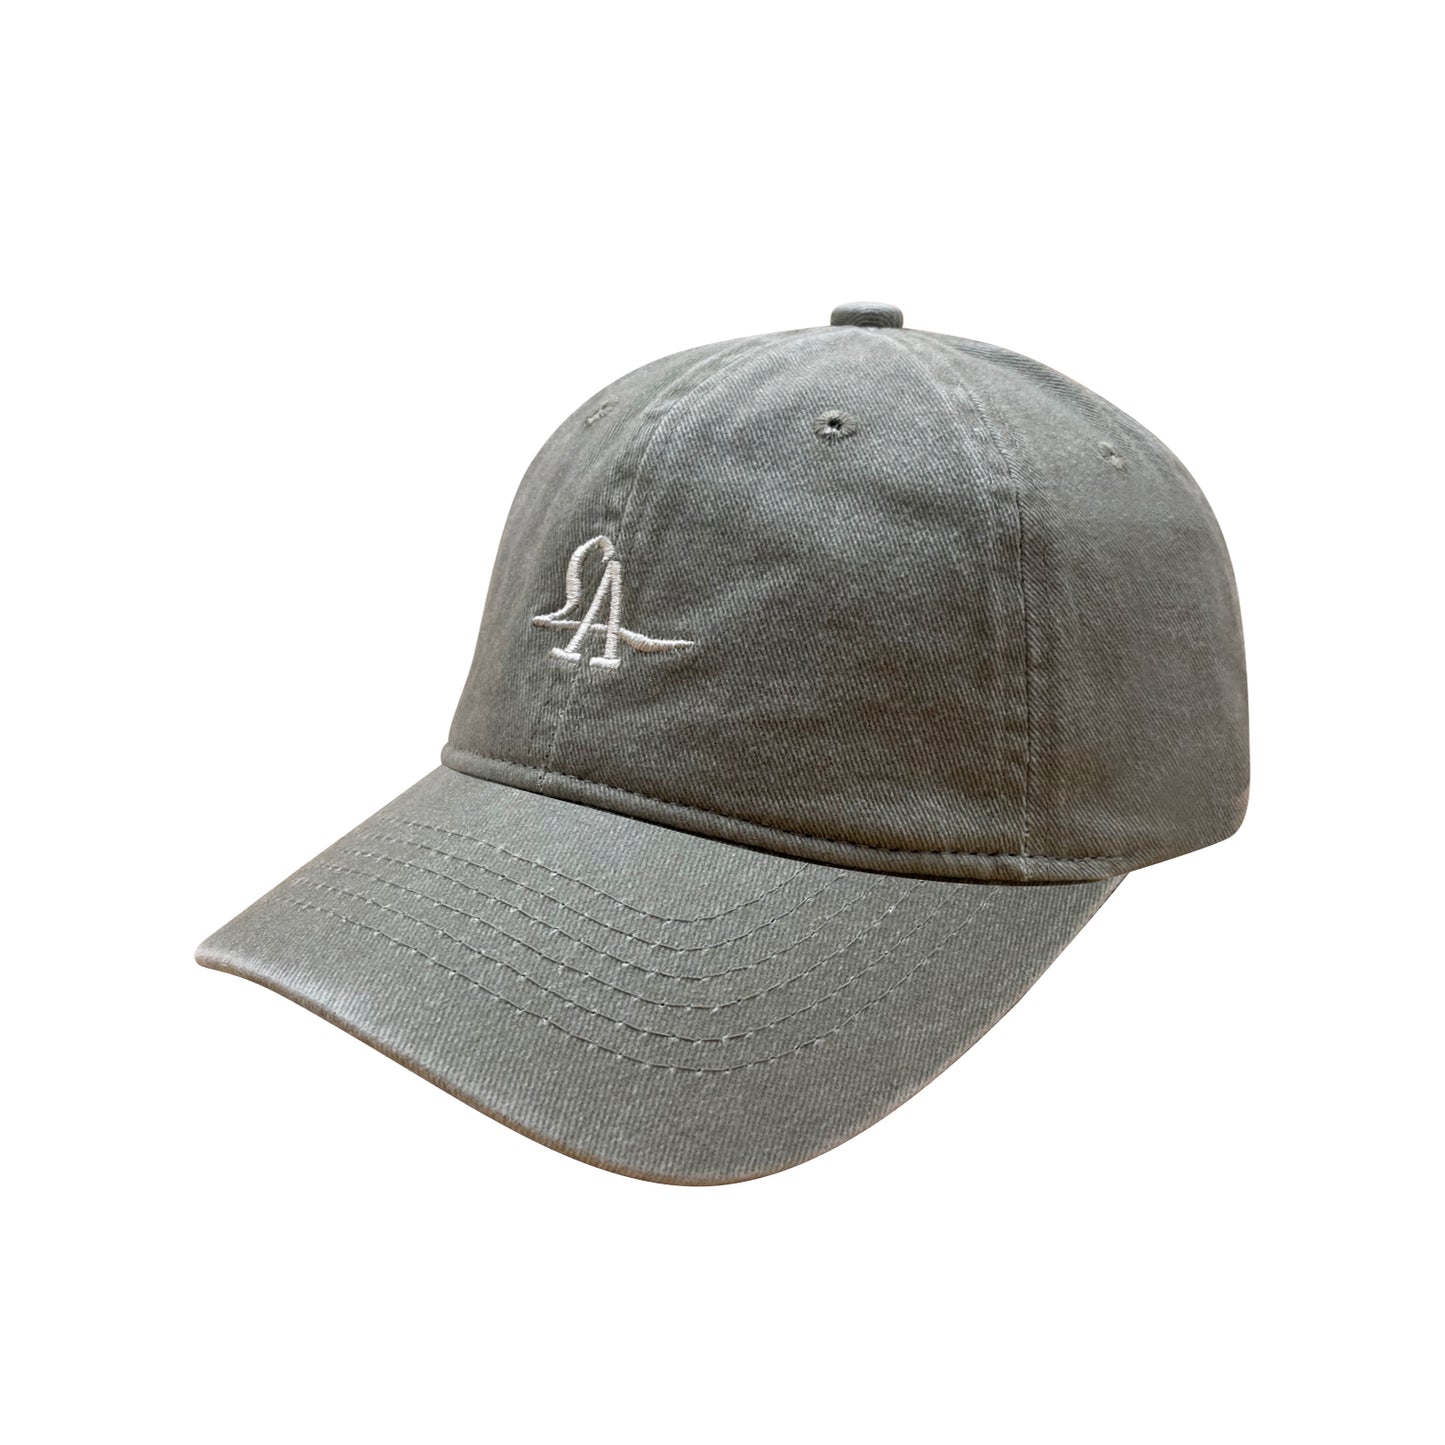 Lust Angeles cap in washed grey